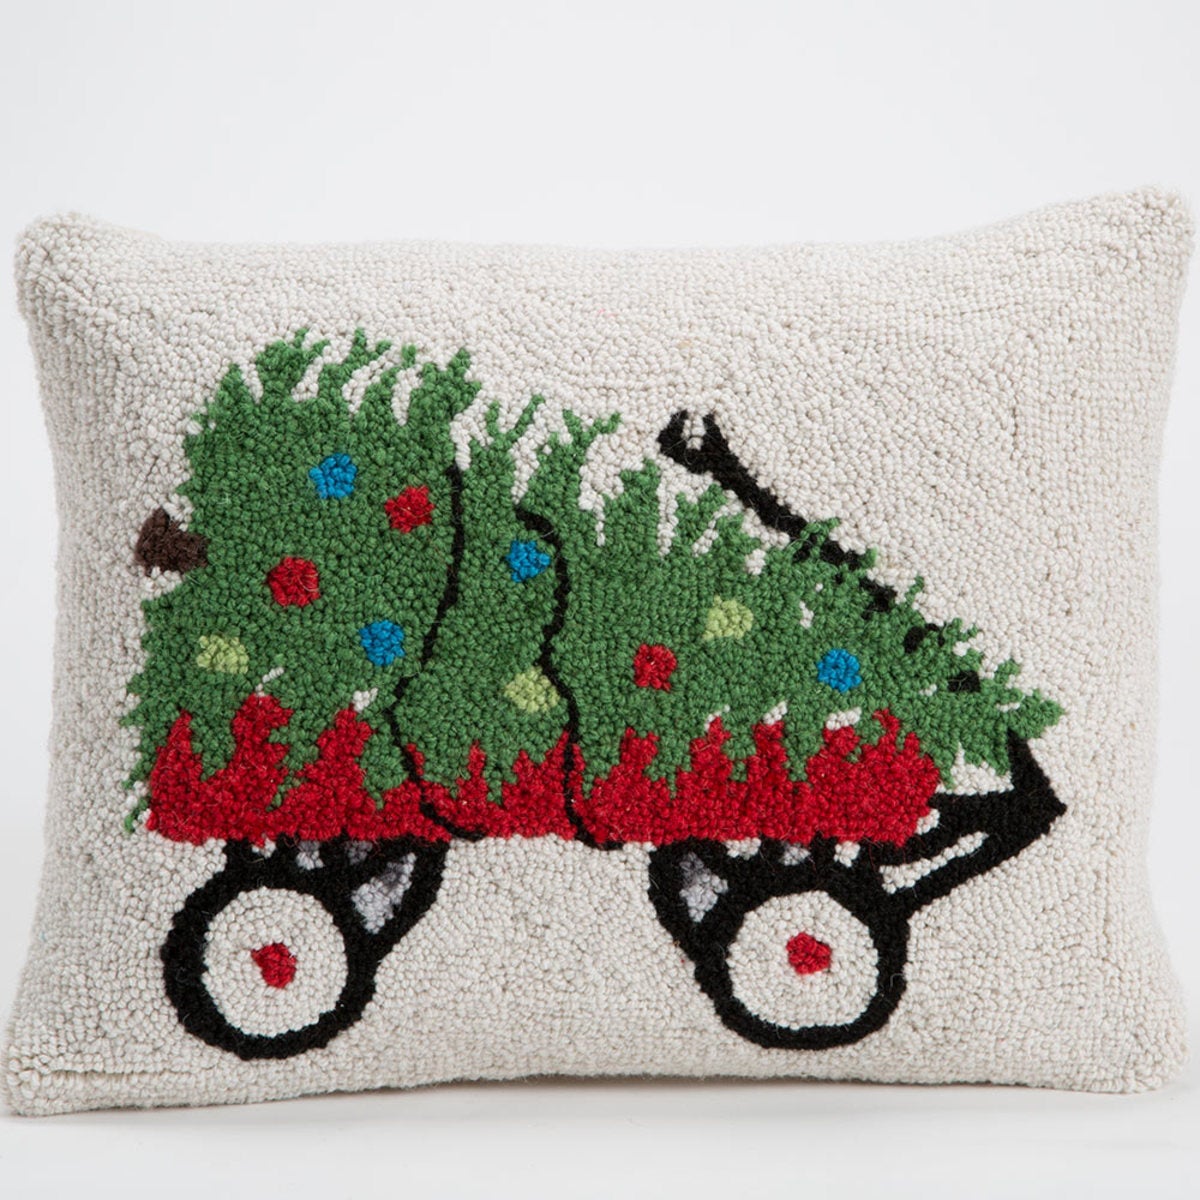 Red Wagon Hand-Hooked Wool Pillow, 18"L x 14"H